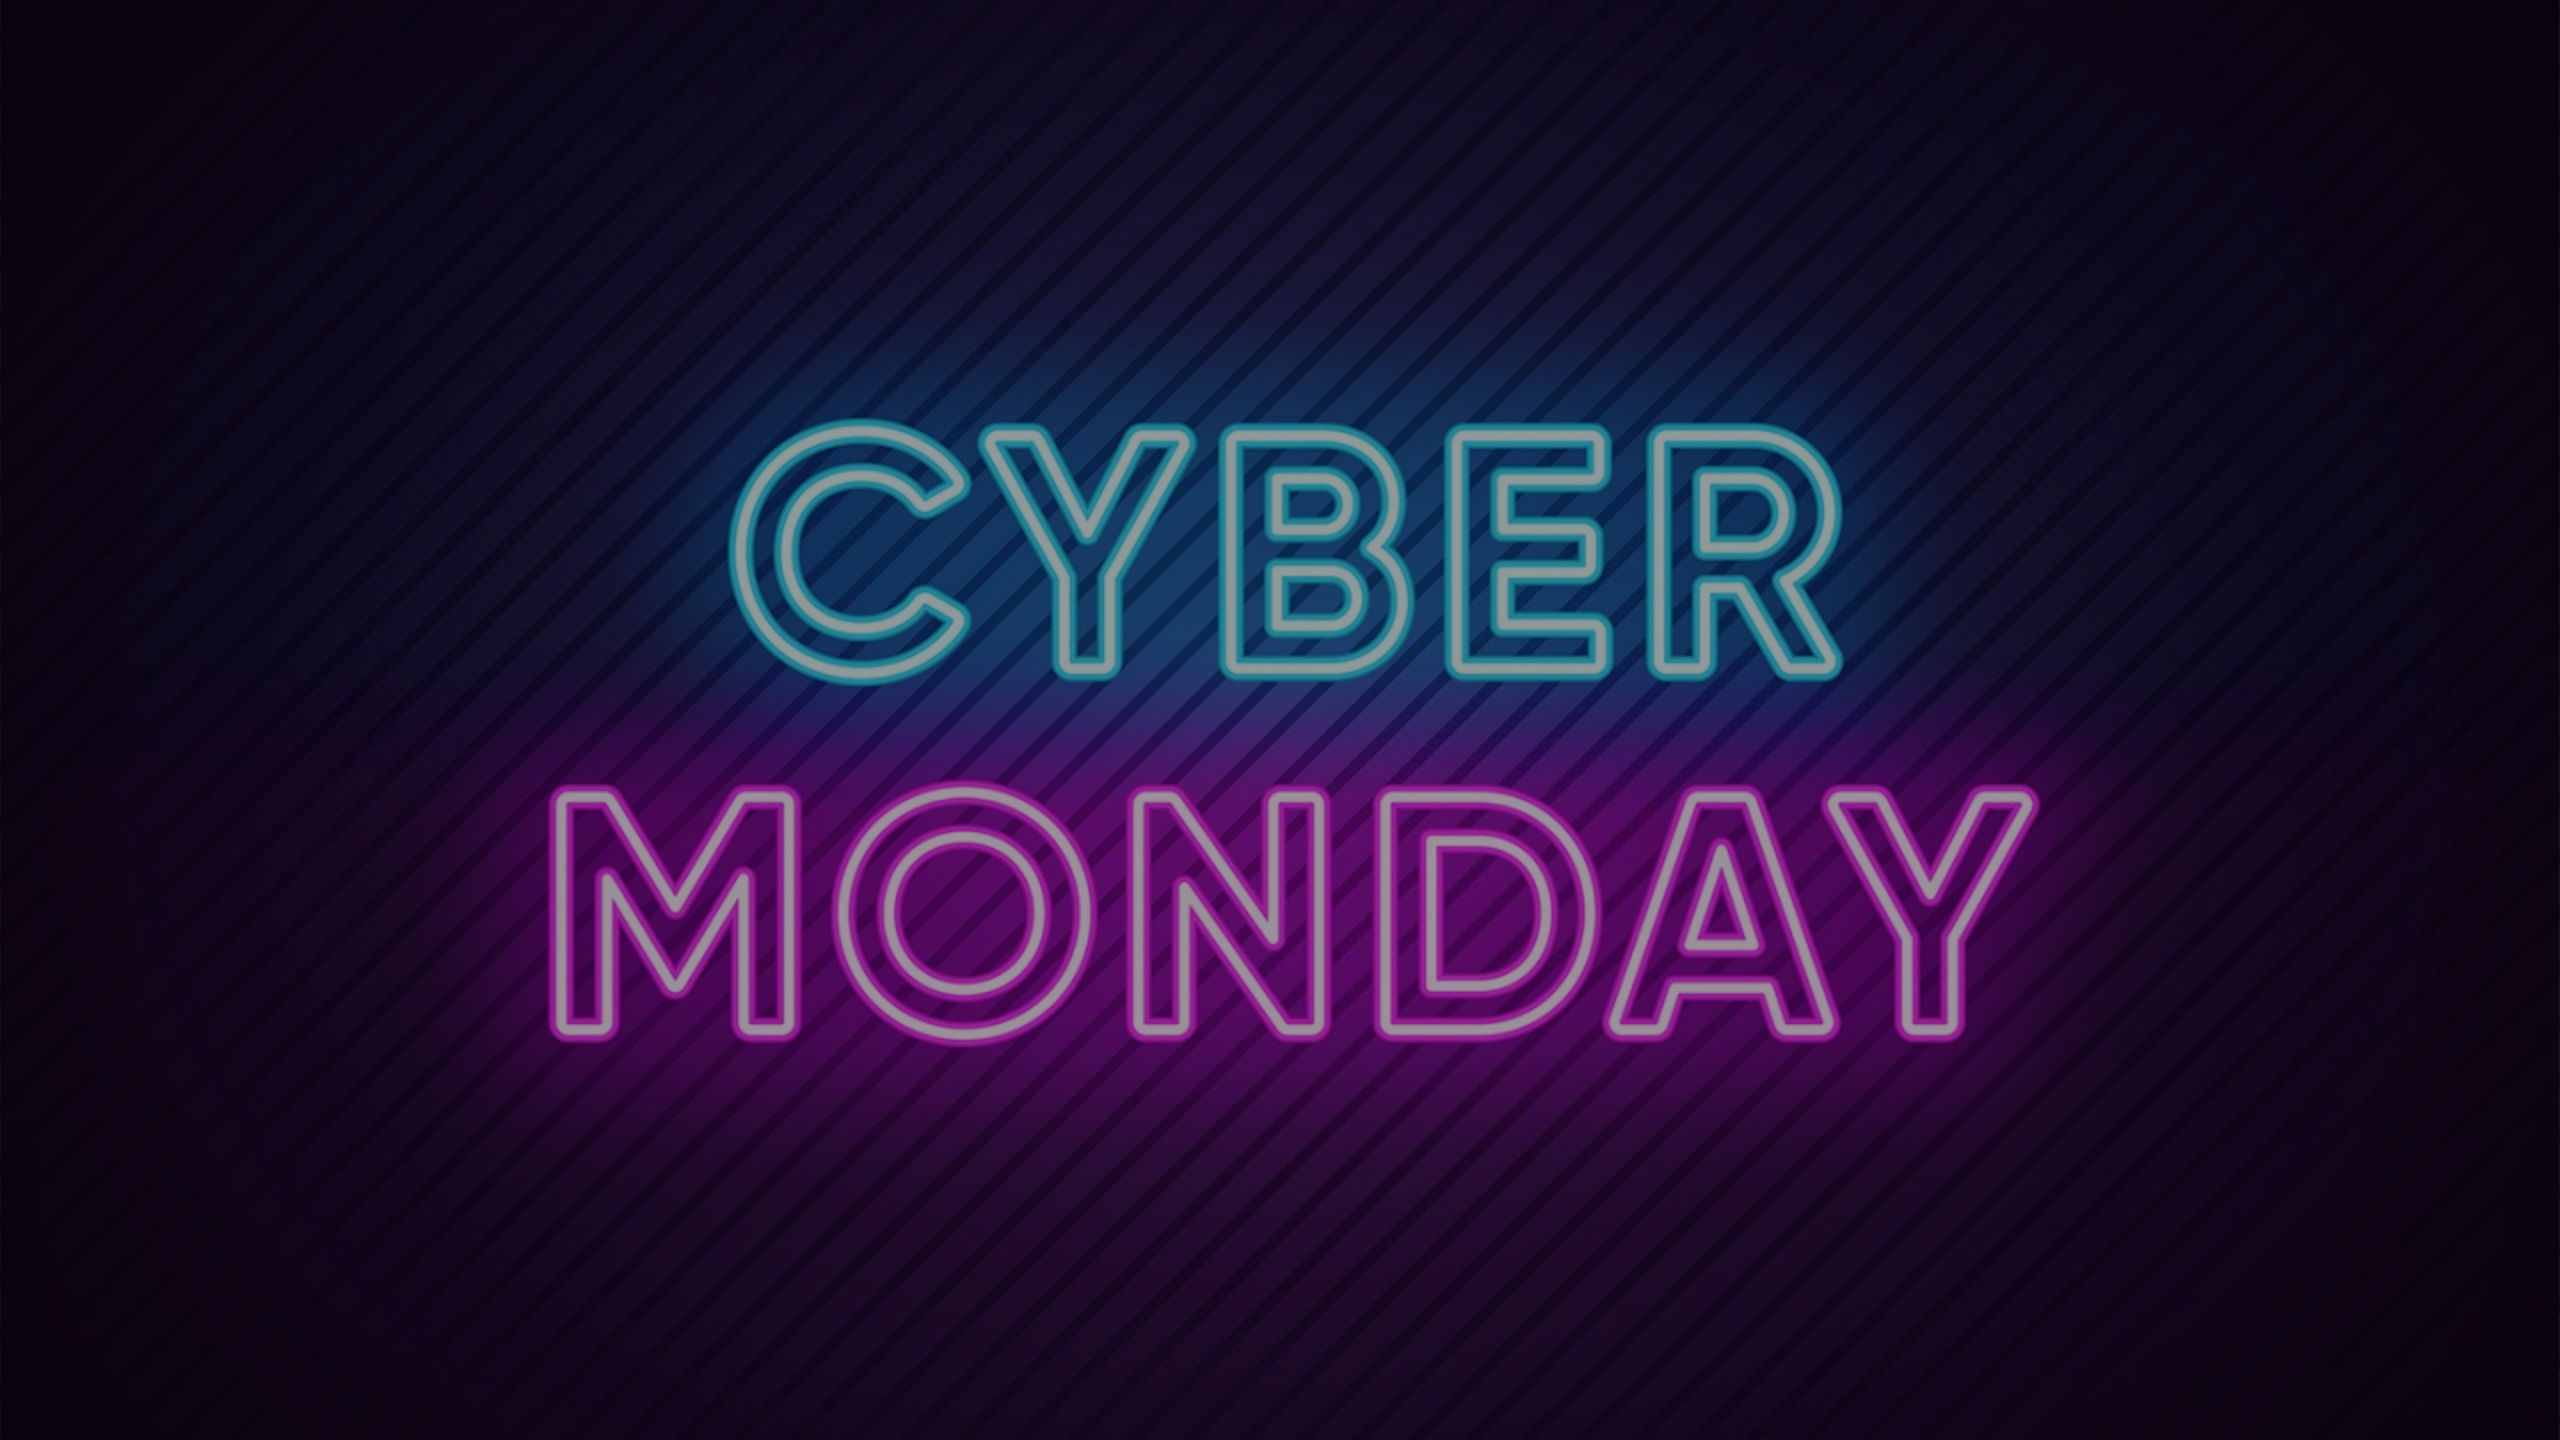 Cyber Monday Strikes!!! Single Family Housing Numbers in Onslow County, NC on  November 29, 2021